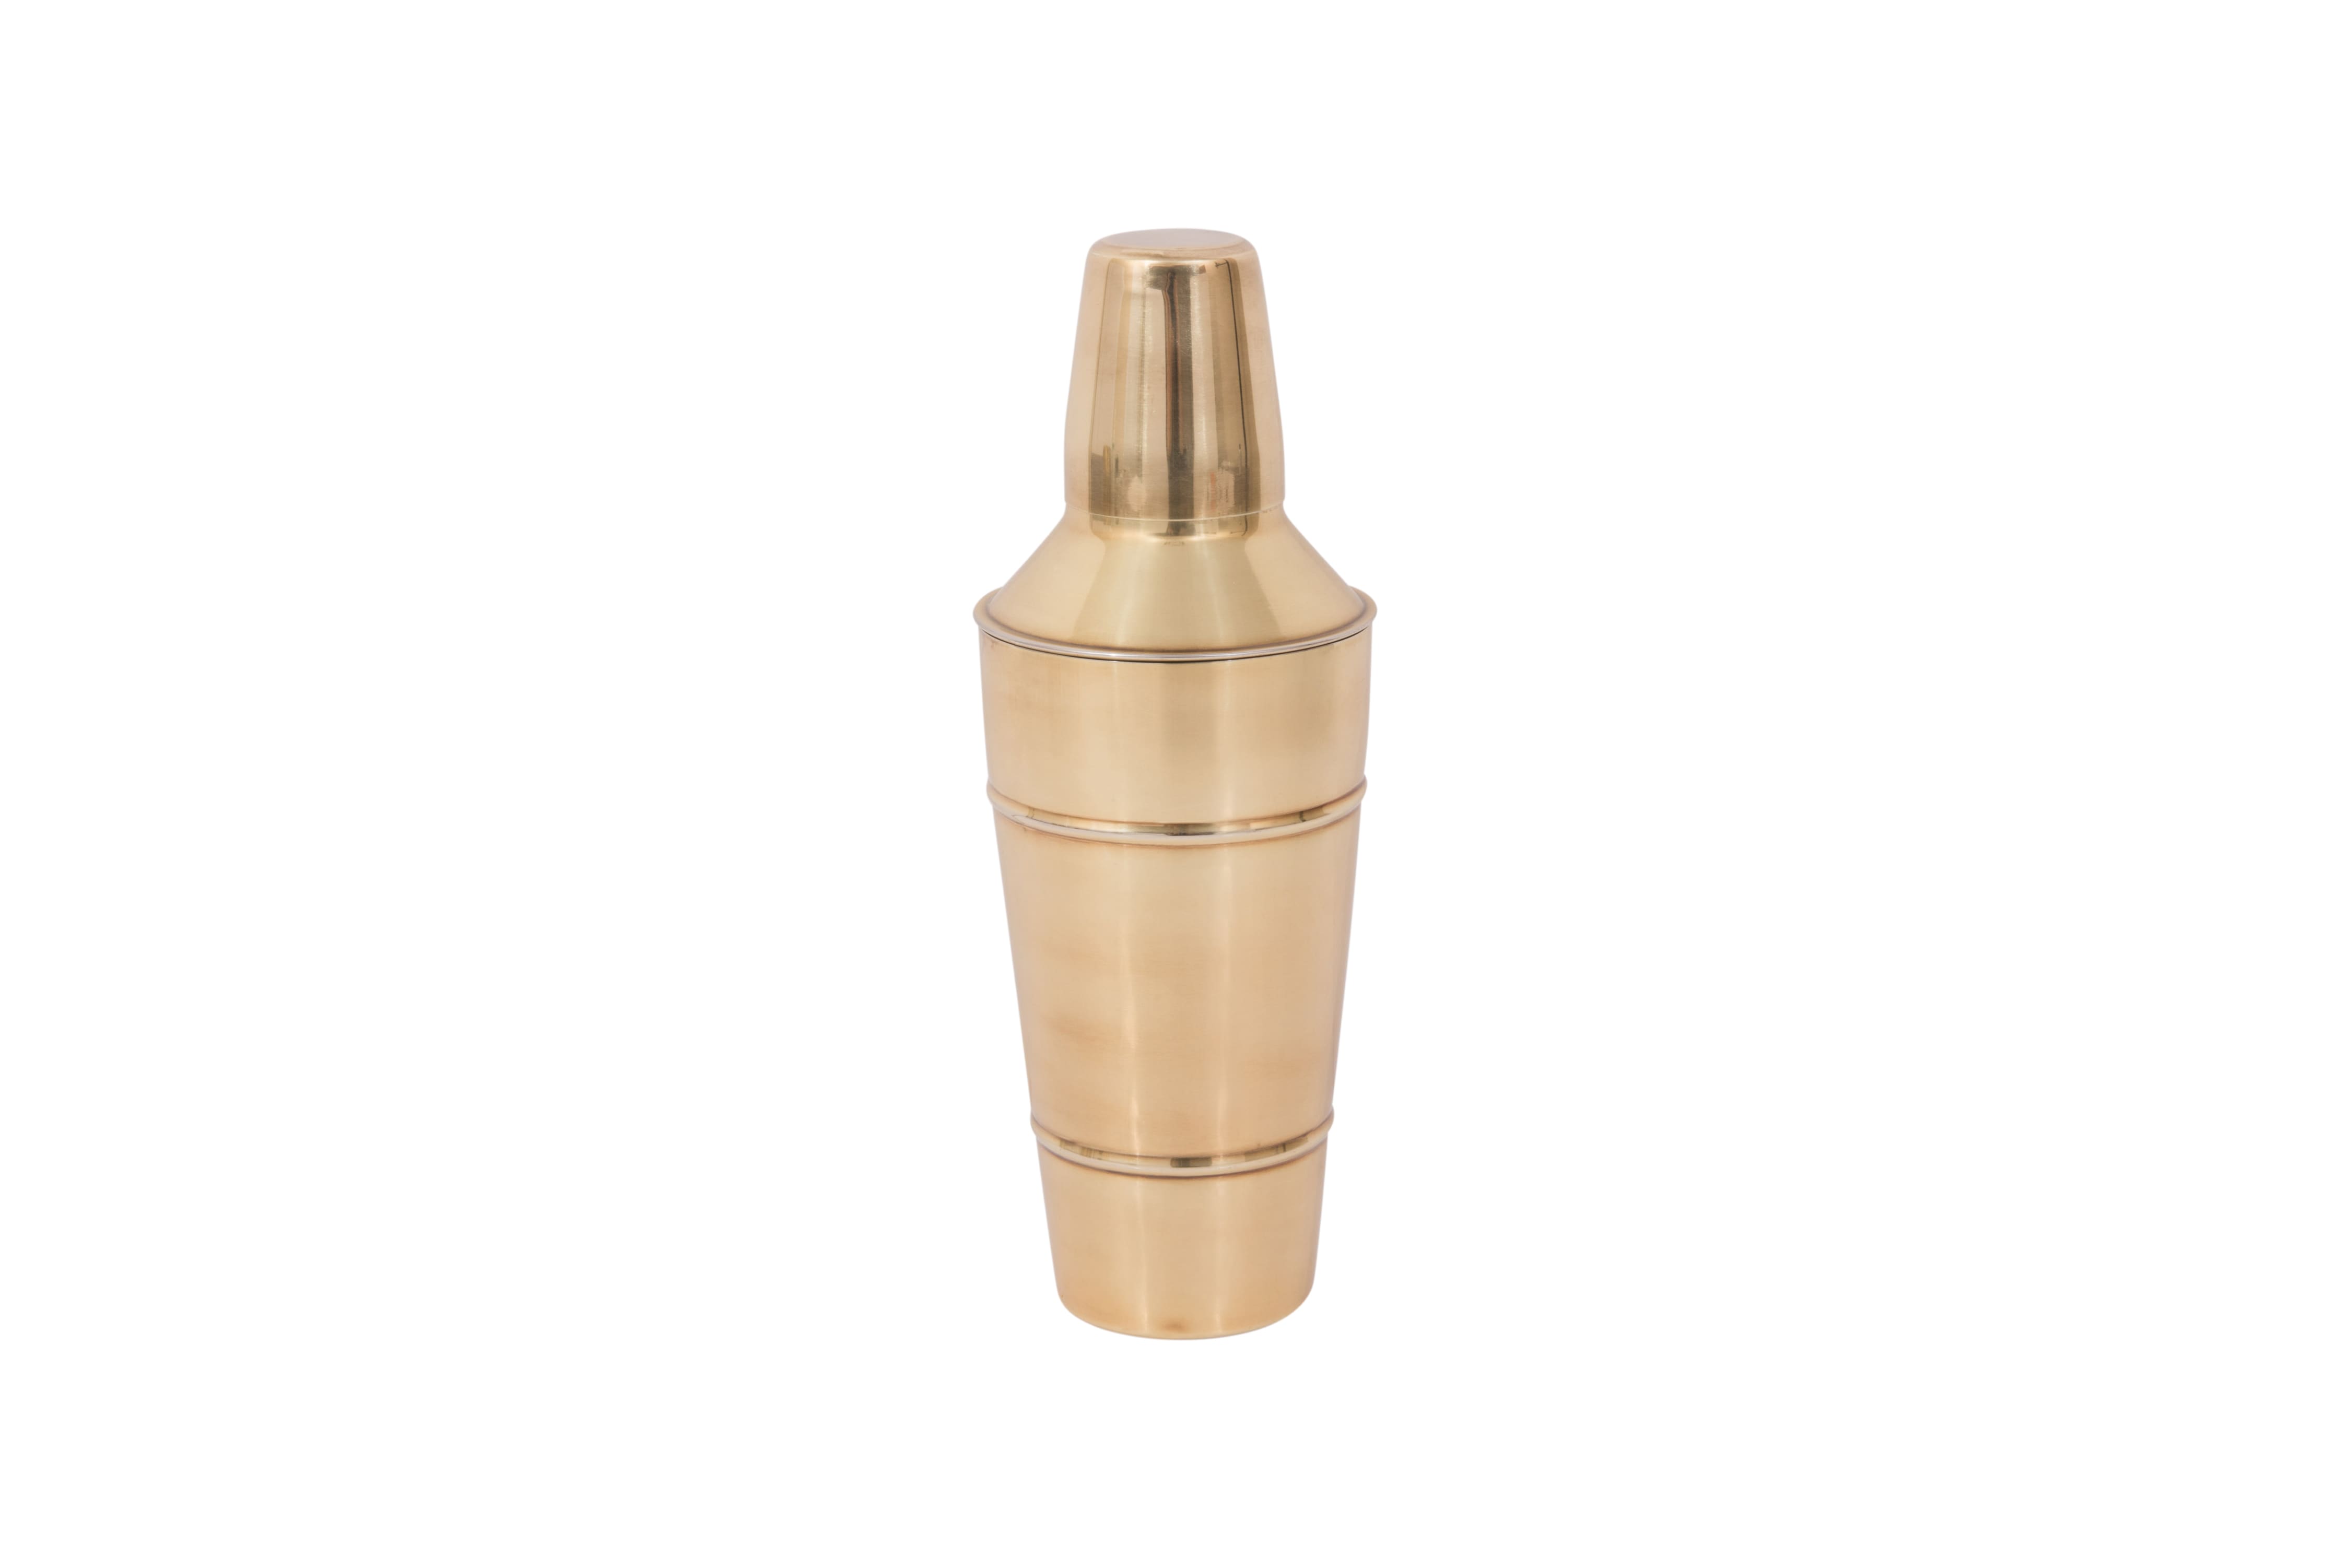 Stainless Steel Cocktail Shaker Gold